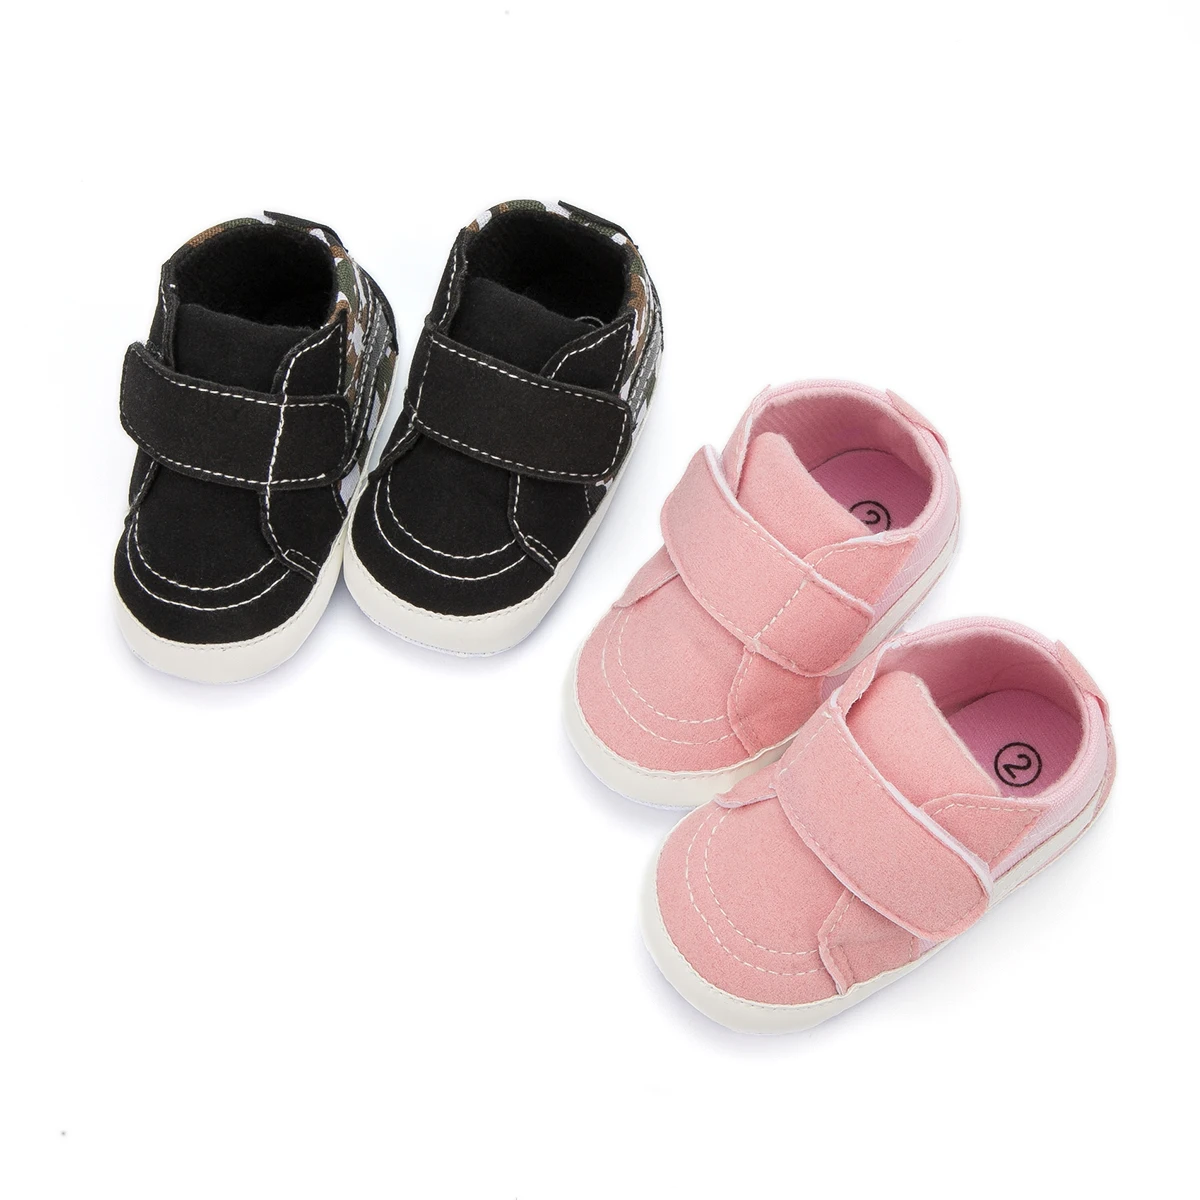 

MOQ 1 Quick shipping Light WeightAnti-slip sneakers cotton Soft sole Breathable organicBaby shoes, Pink,black